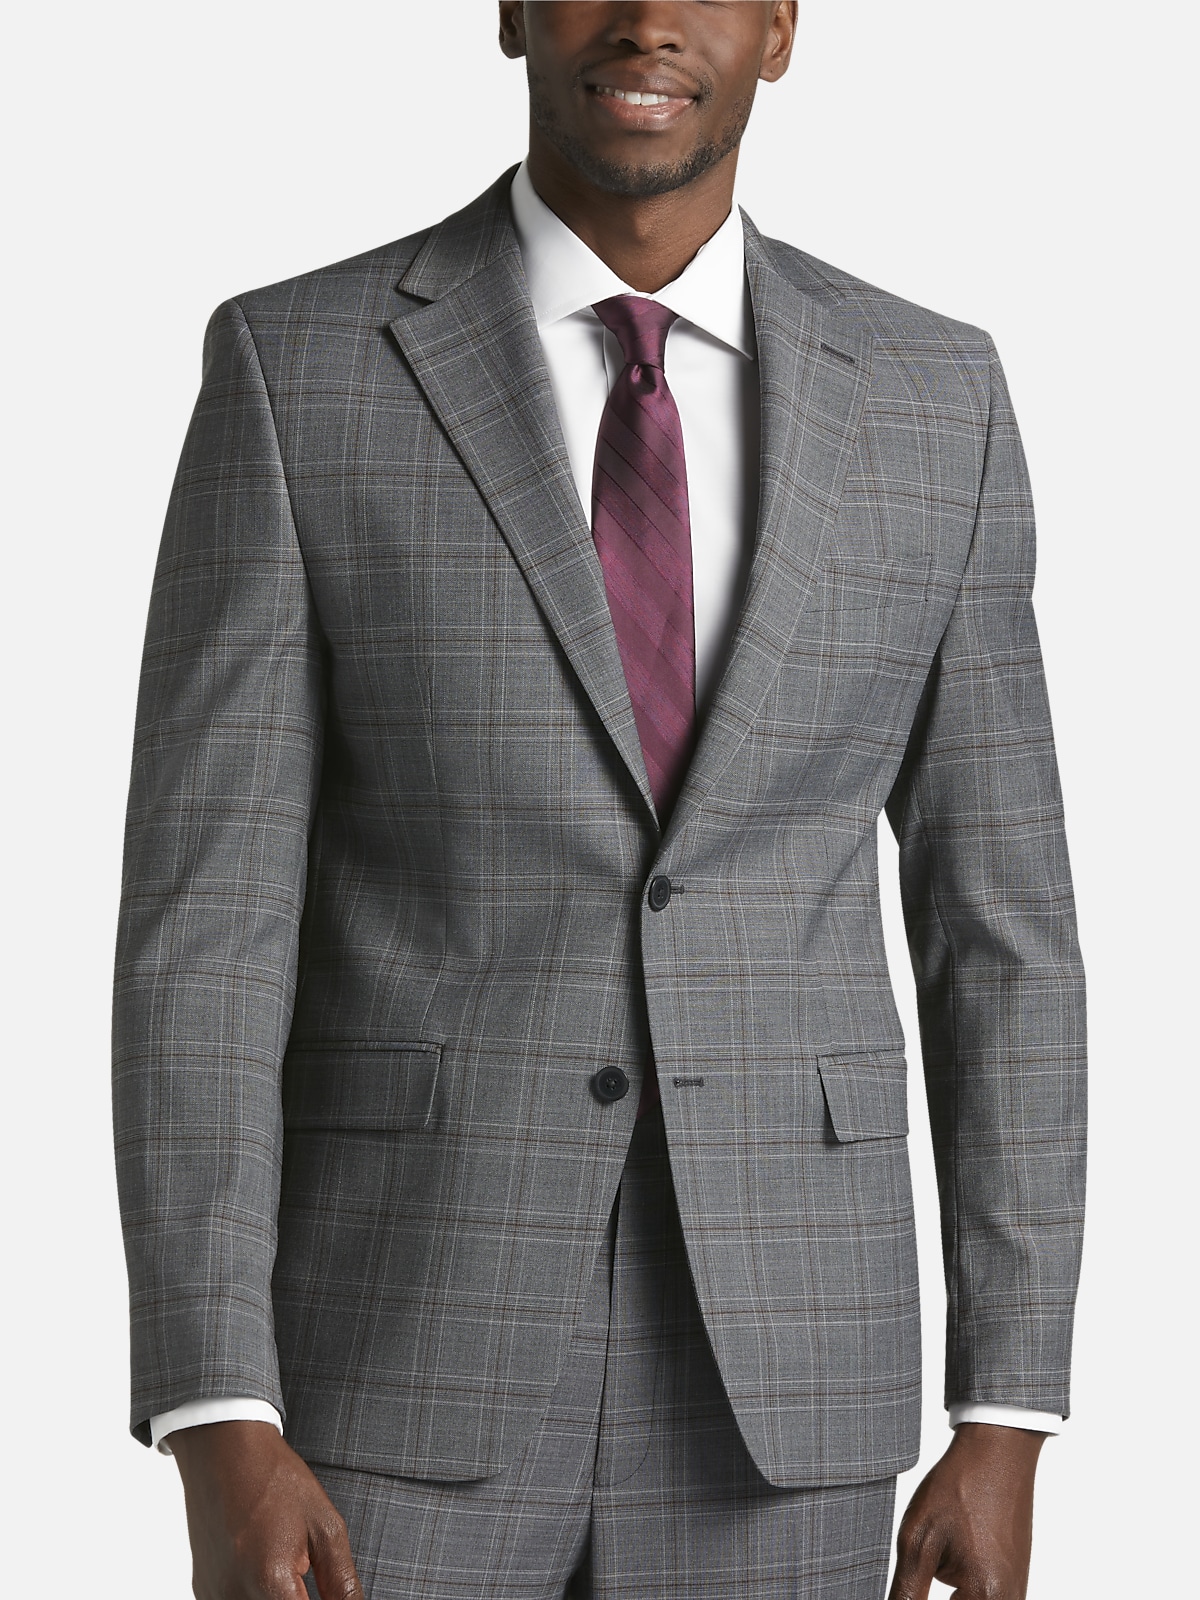 Michael Strahan Classic Fit Plaid Suit Separates Jacket All Clearance 3999 Mens Wearhouse 